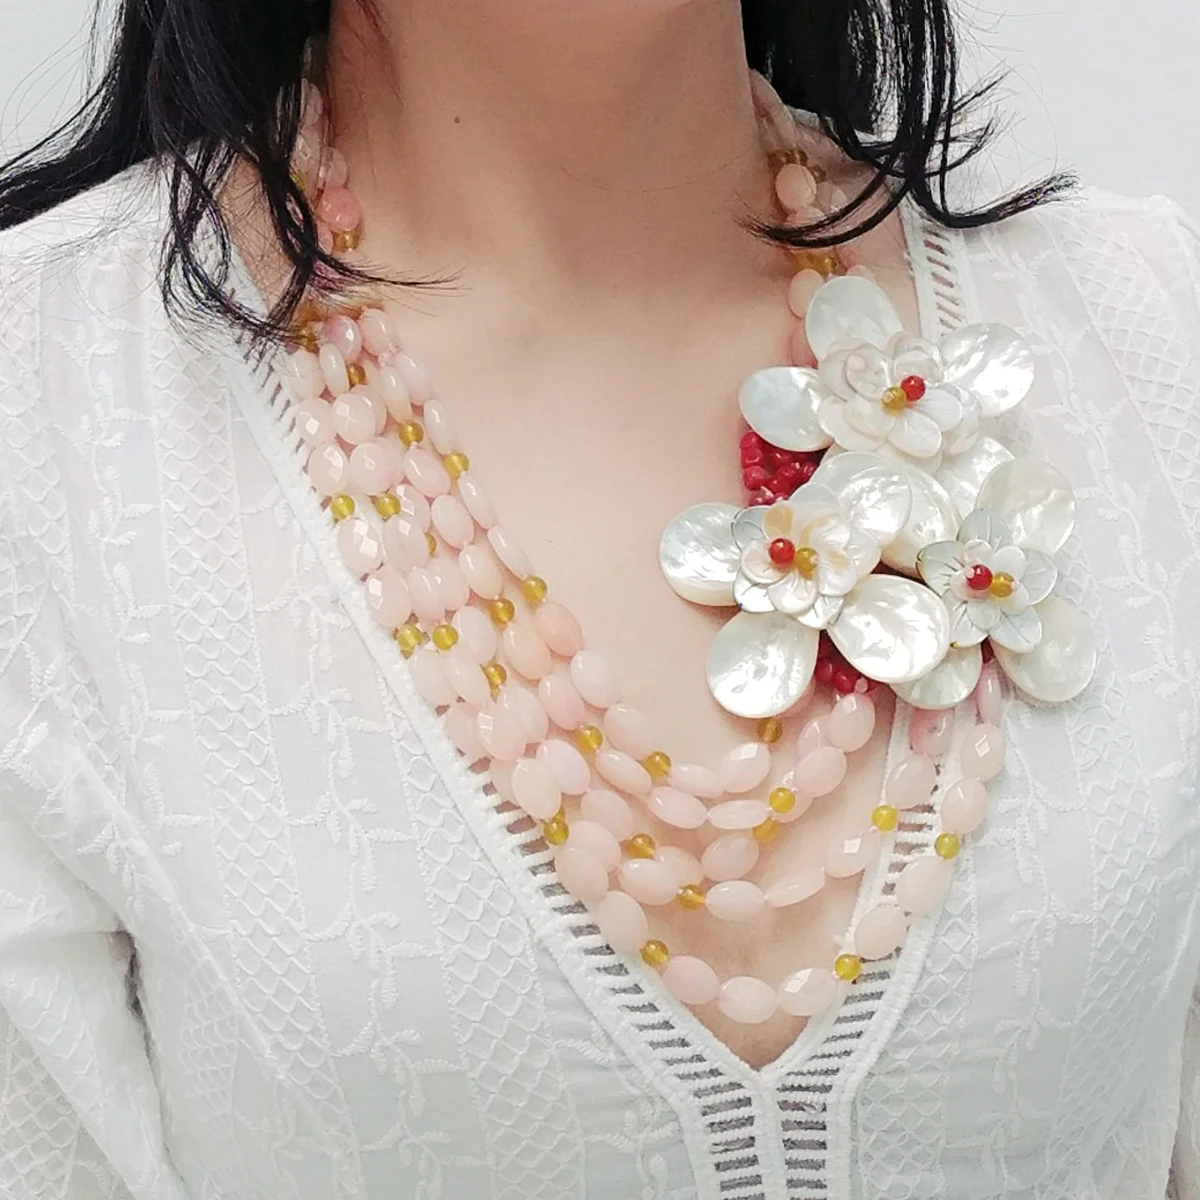 

Lii Ji Real Stone Pink Color Statement Necklace 62cm Pink Jade Lemon Jade Mother of Pearl Flowers Necklace Stocksale ONLY 1PCS